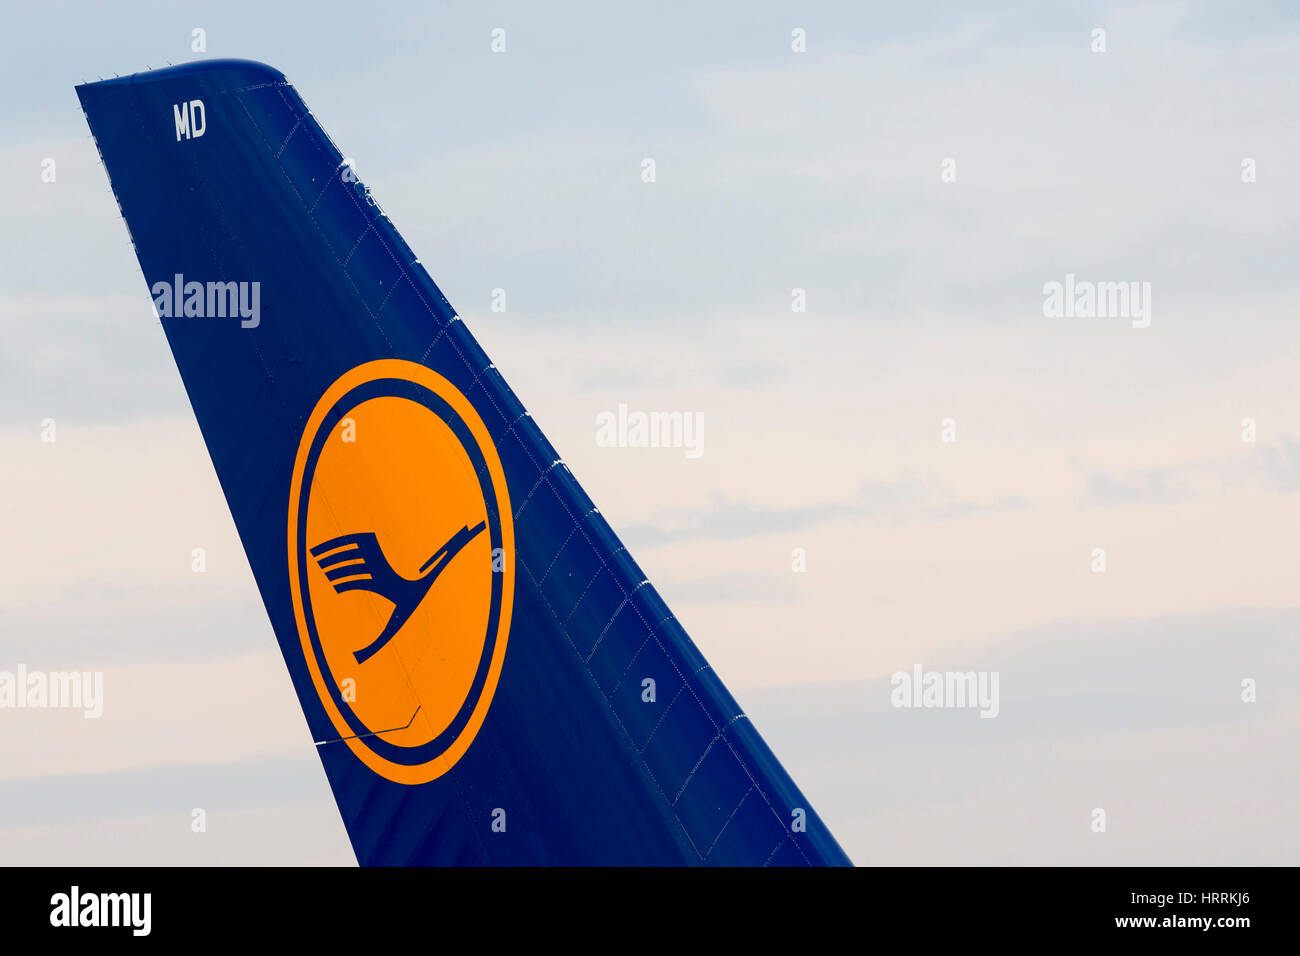 Sofia, Bulgaria - October 16, 2016: Largest passenger aircraft Airbus A380 tail wing is seen on Sofia's airport track after landing. Lufthansa logo. Stock Photo